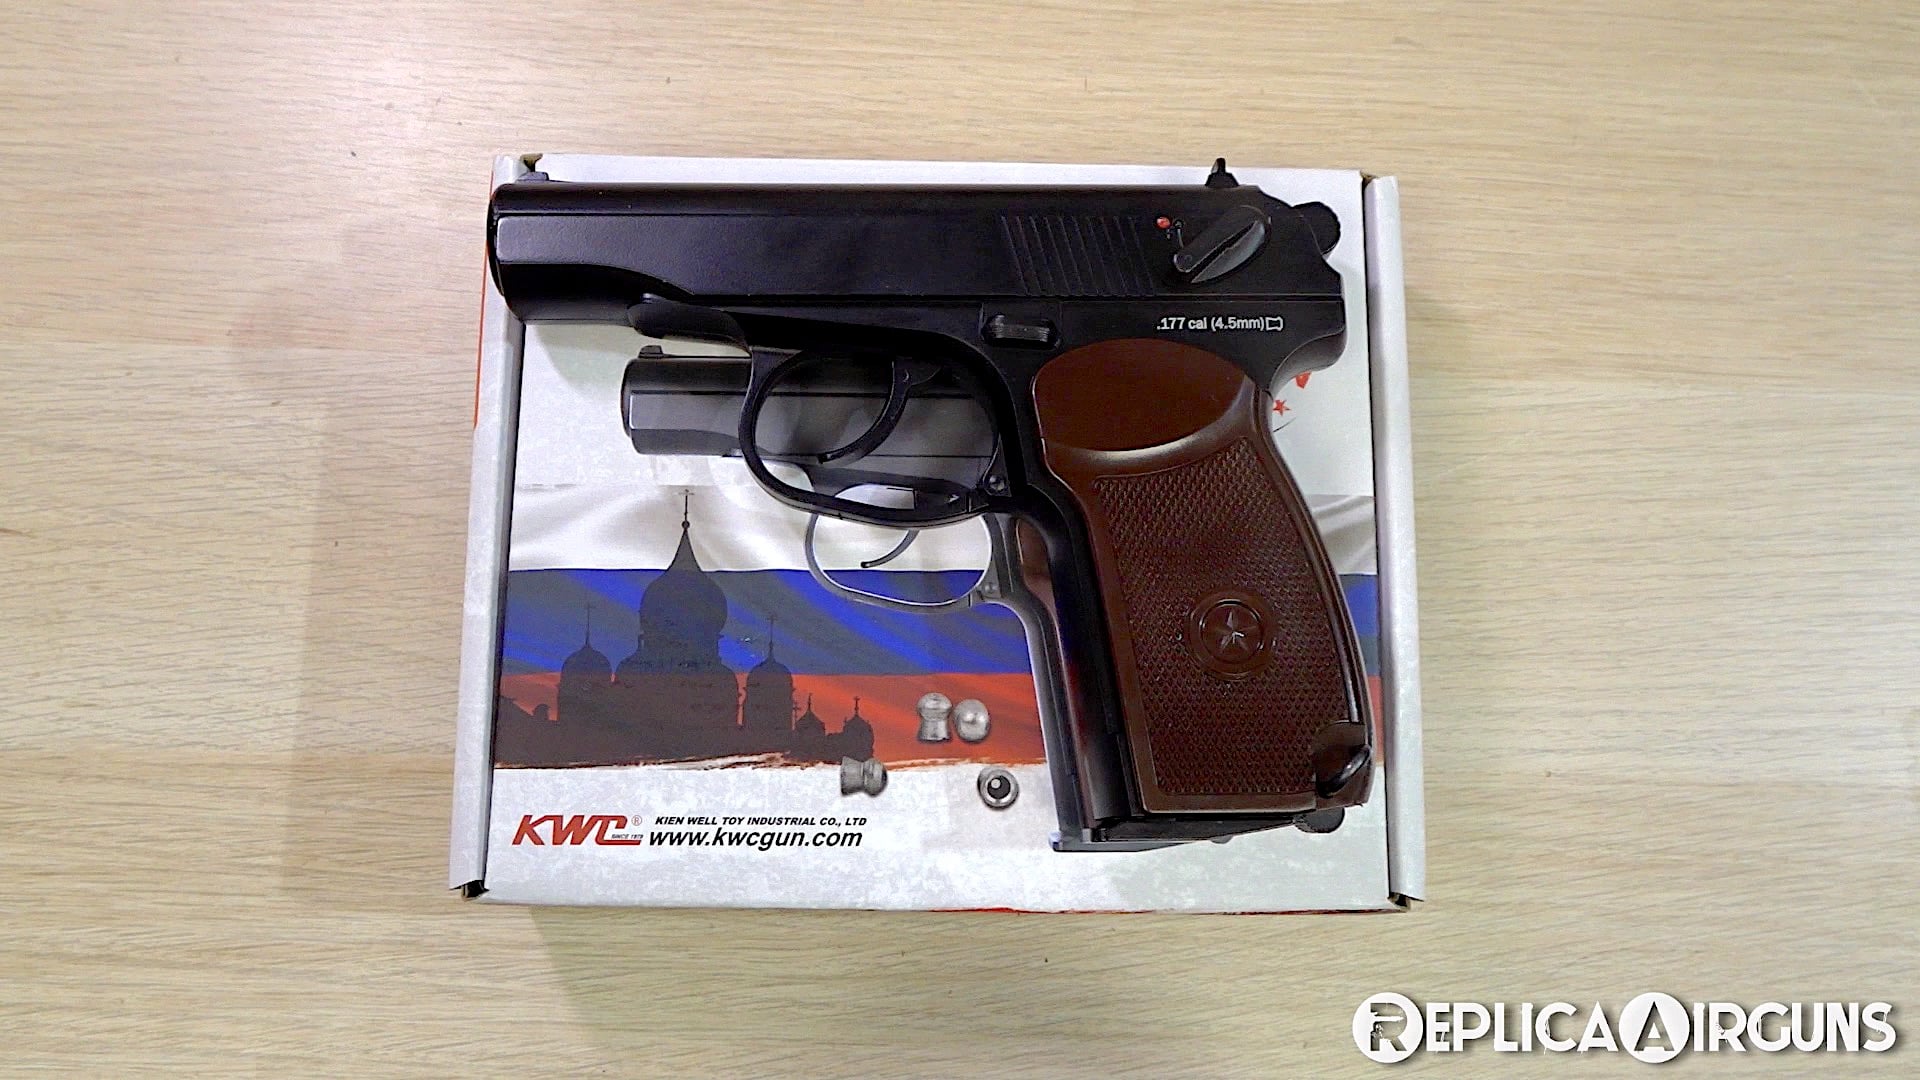 KWC PM Makarov Non-Blowback CO2 Pellet Pistol Table Top Review